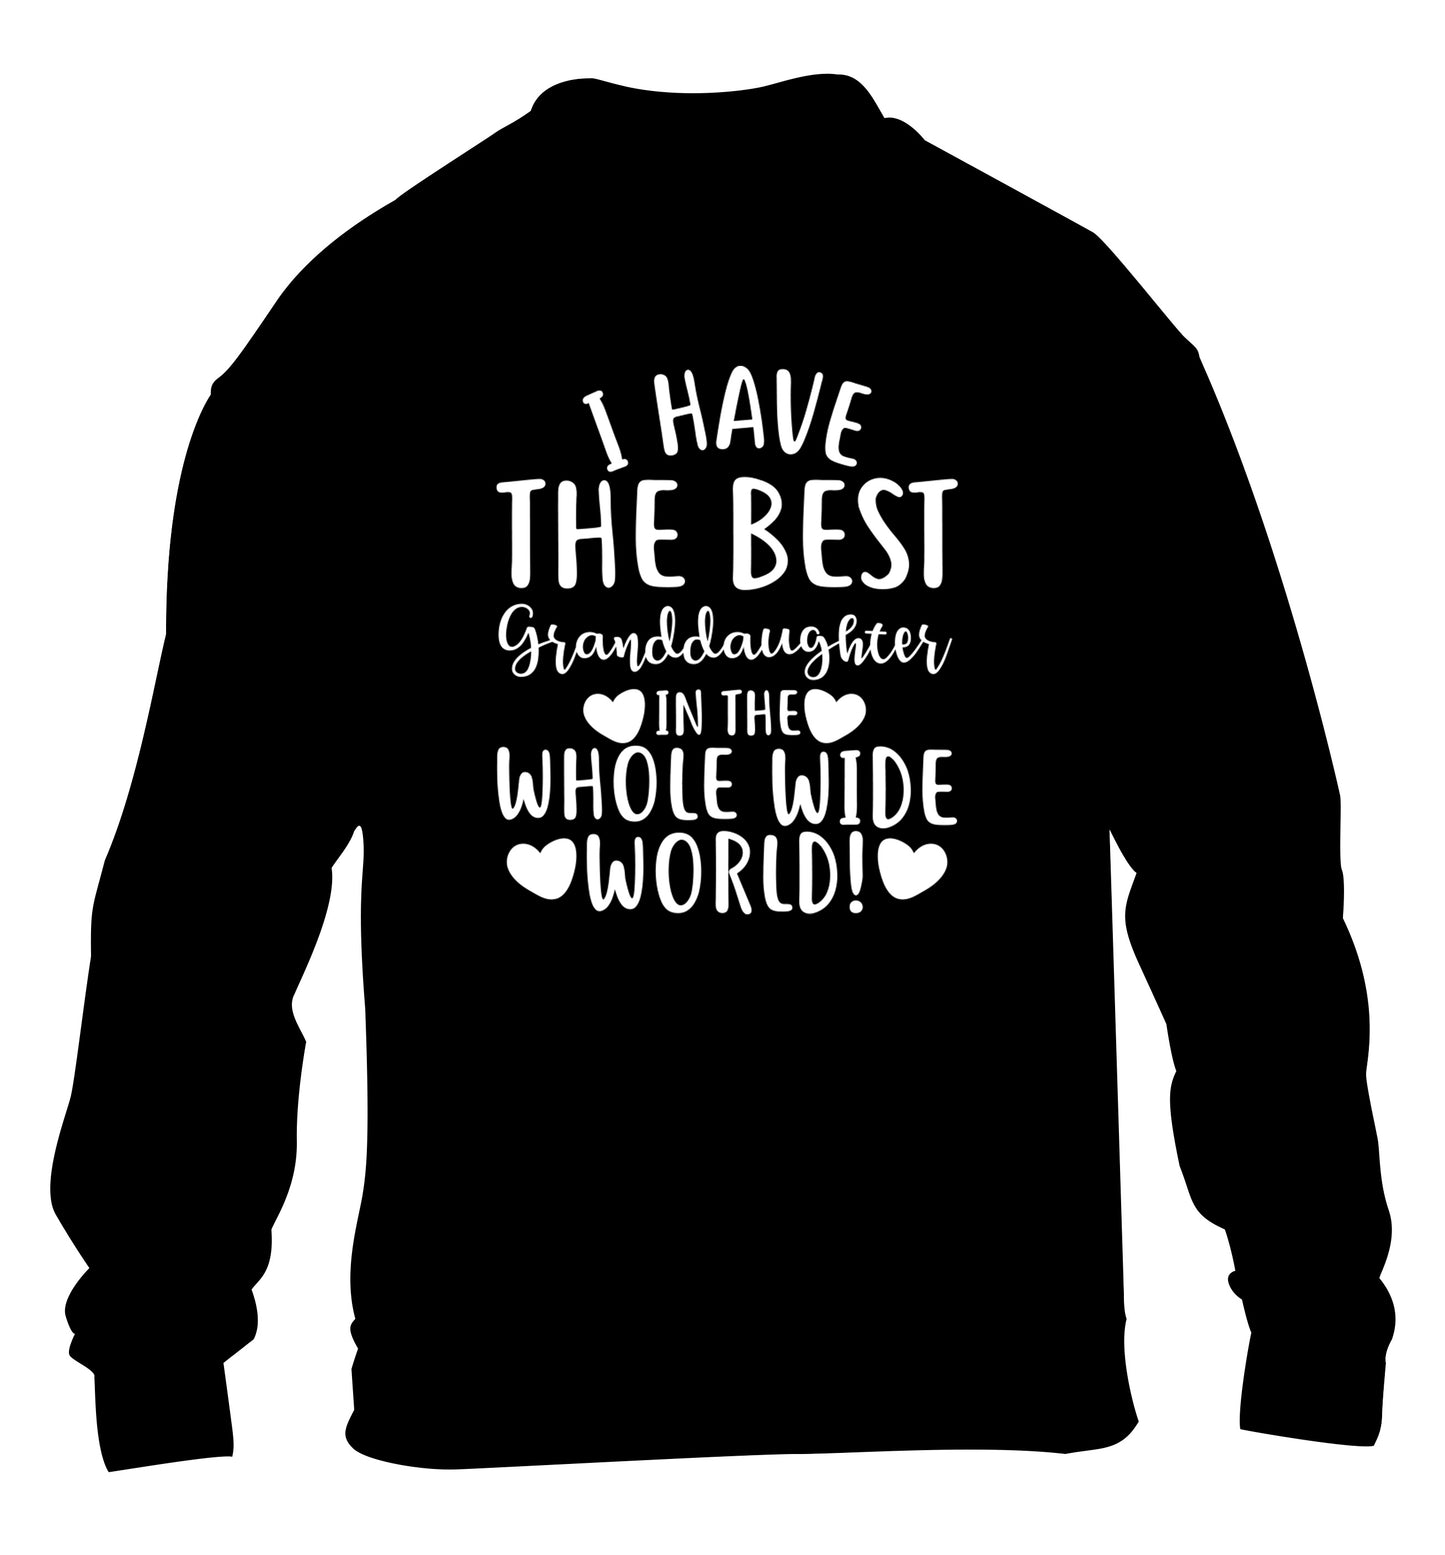 I have the best granddaughter in the whole wide world! children's black sweater 12-13 Years